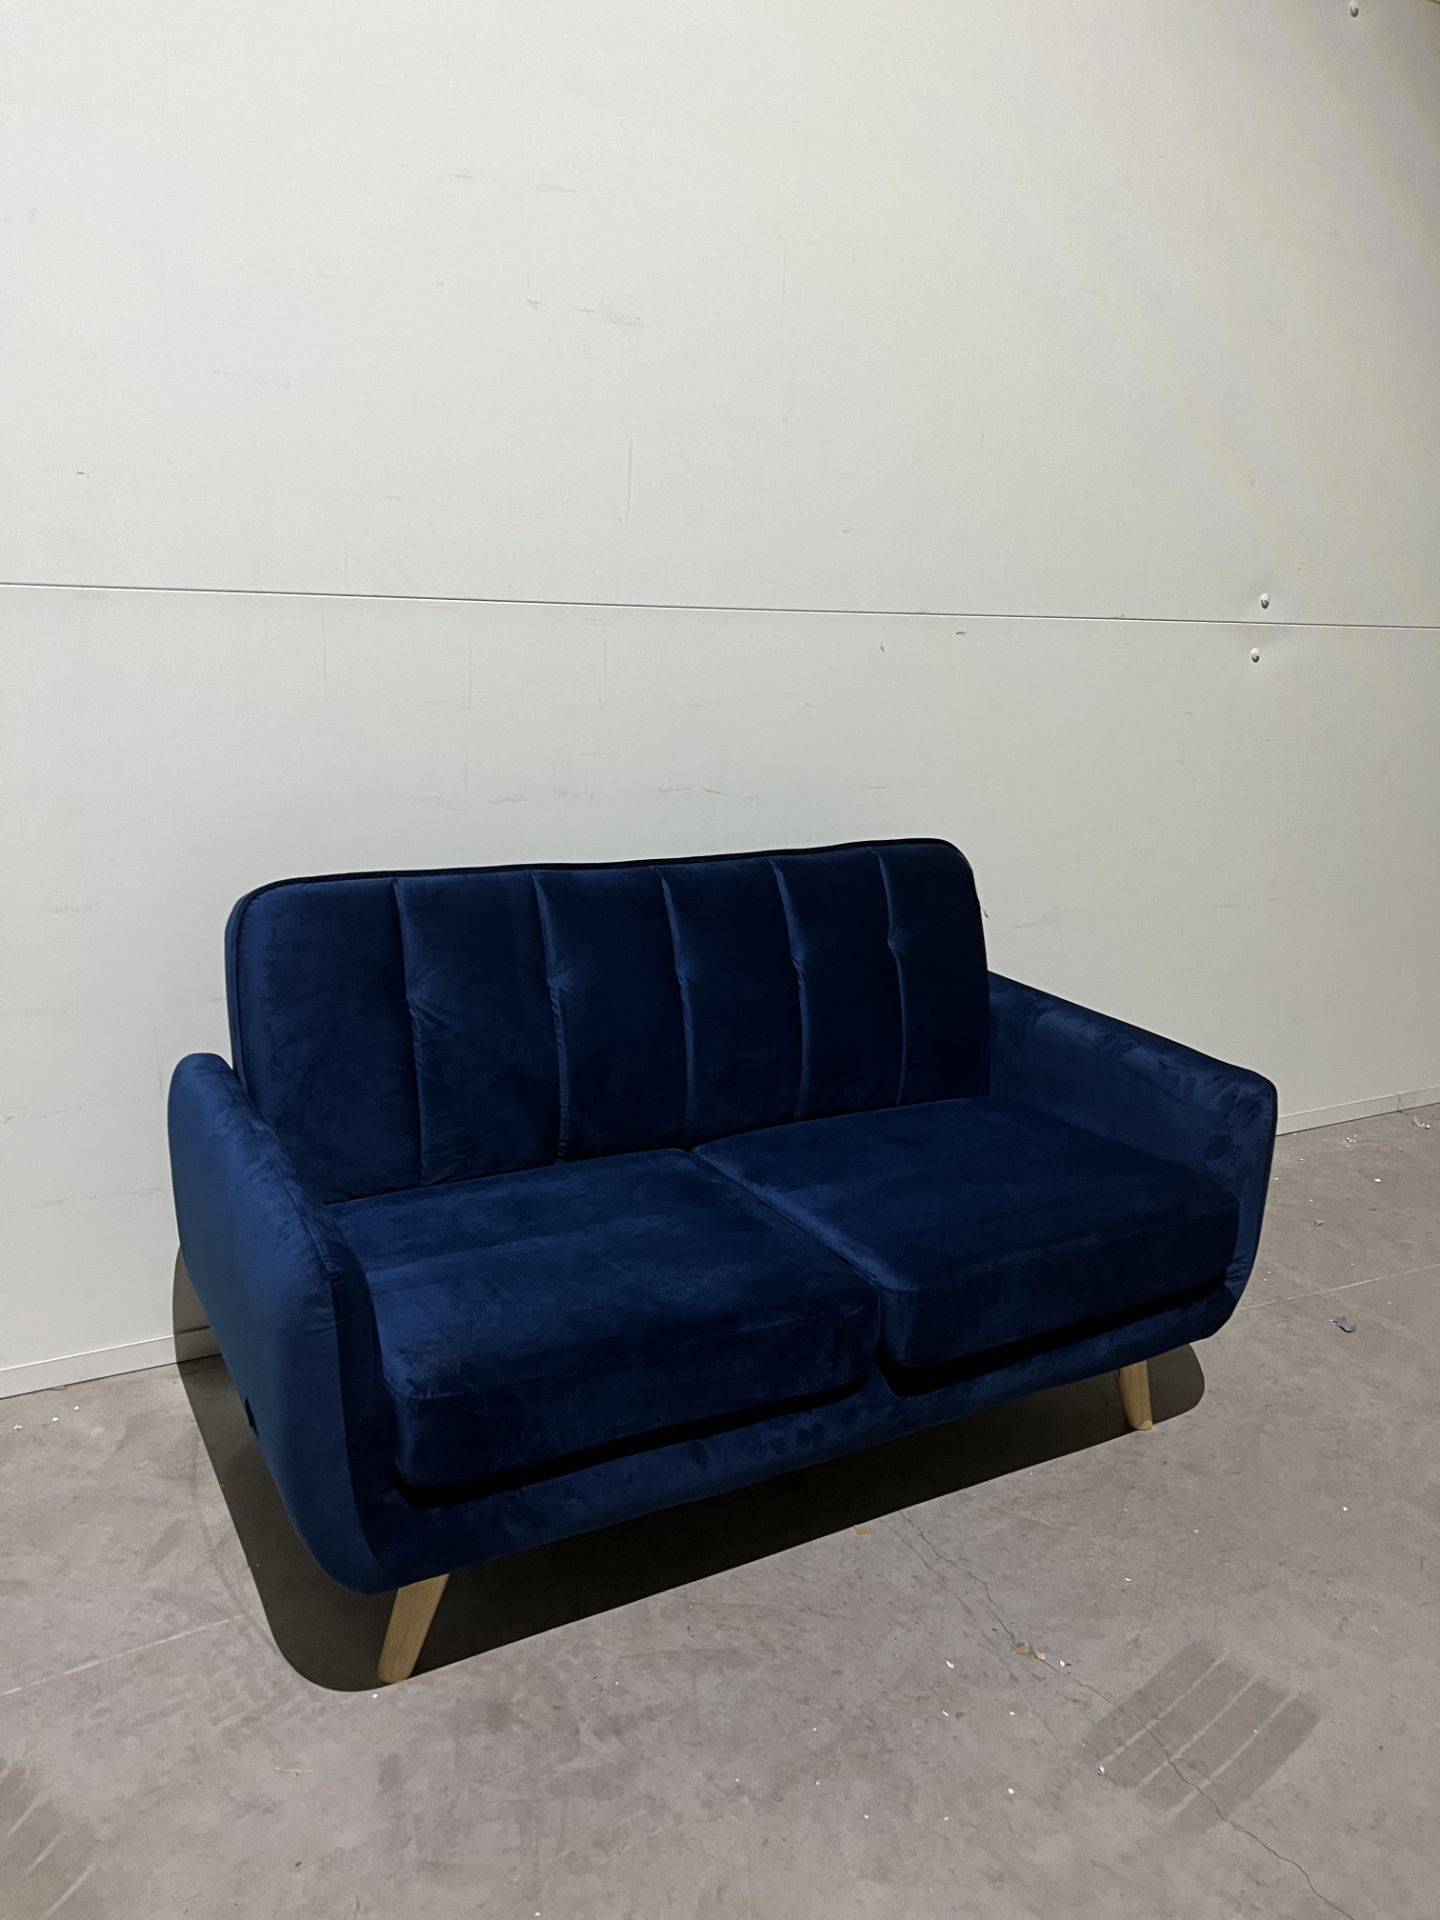 Camila Royal Blue Velvet Sofa Defined By It's Soft Curves And Low Rise Design As Well As Subtle - Image 2 of 2